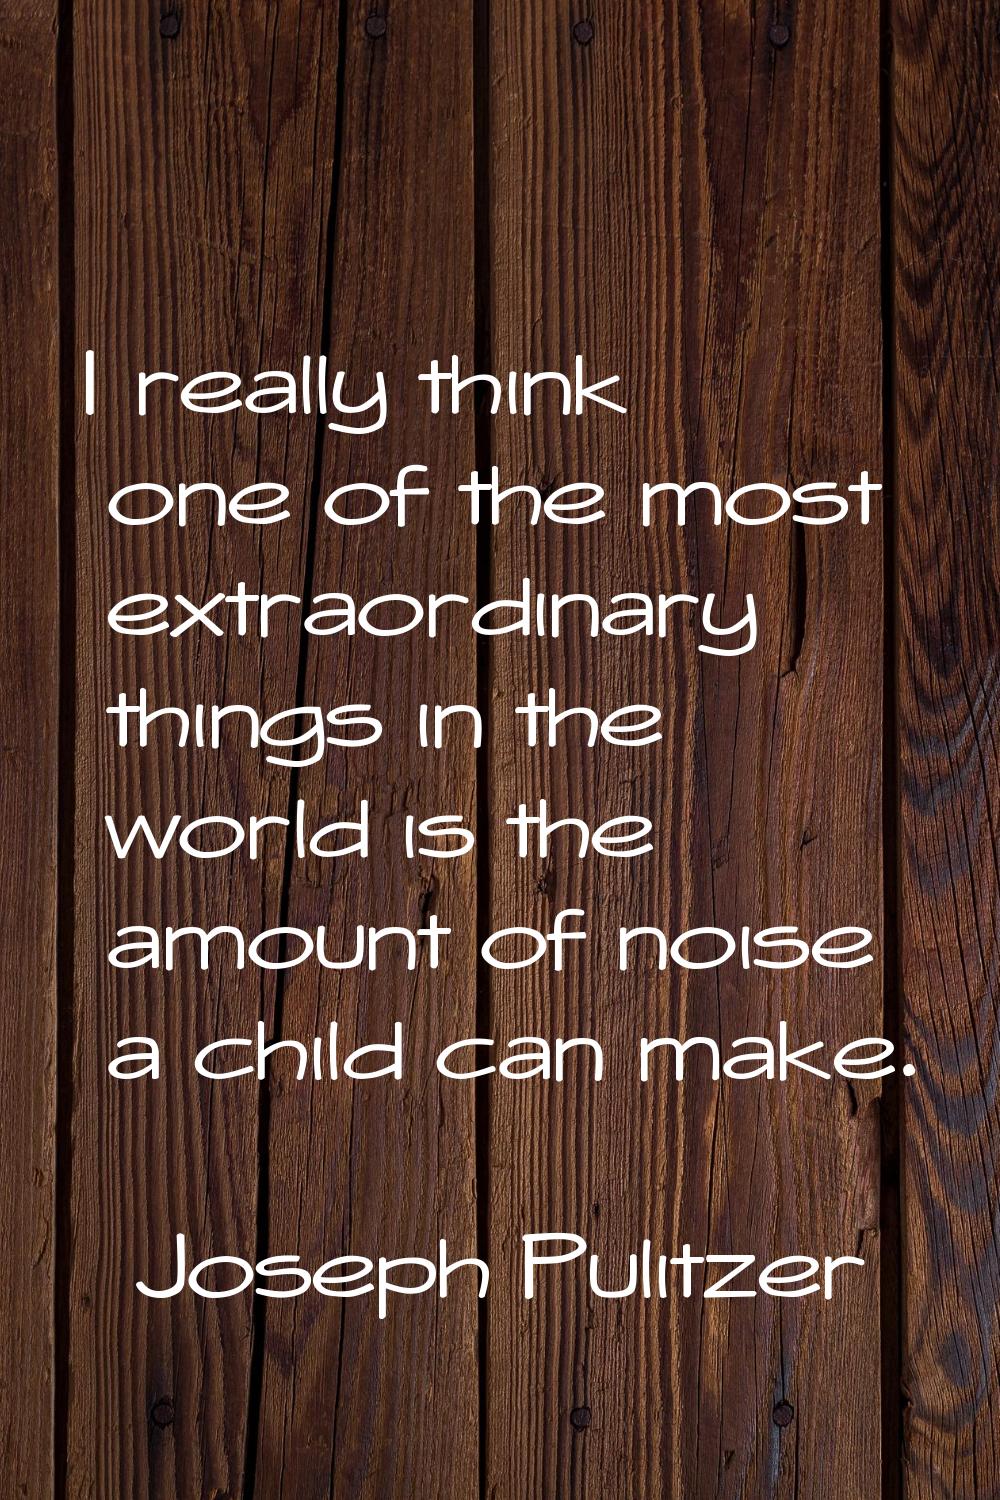 I really think one of the most extraordinary things in the world is the amount of noise a child can